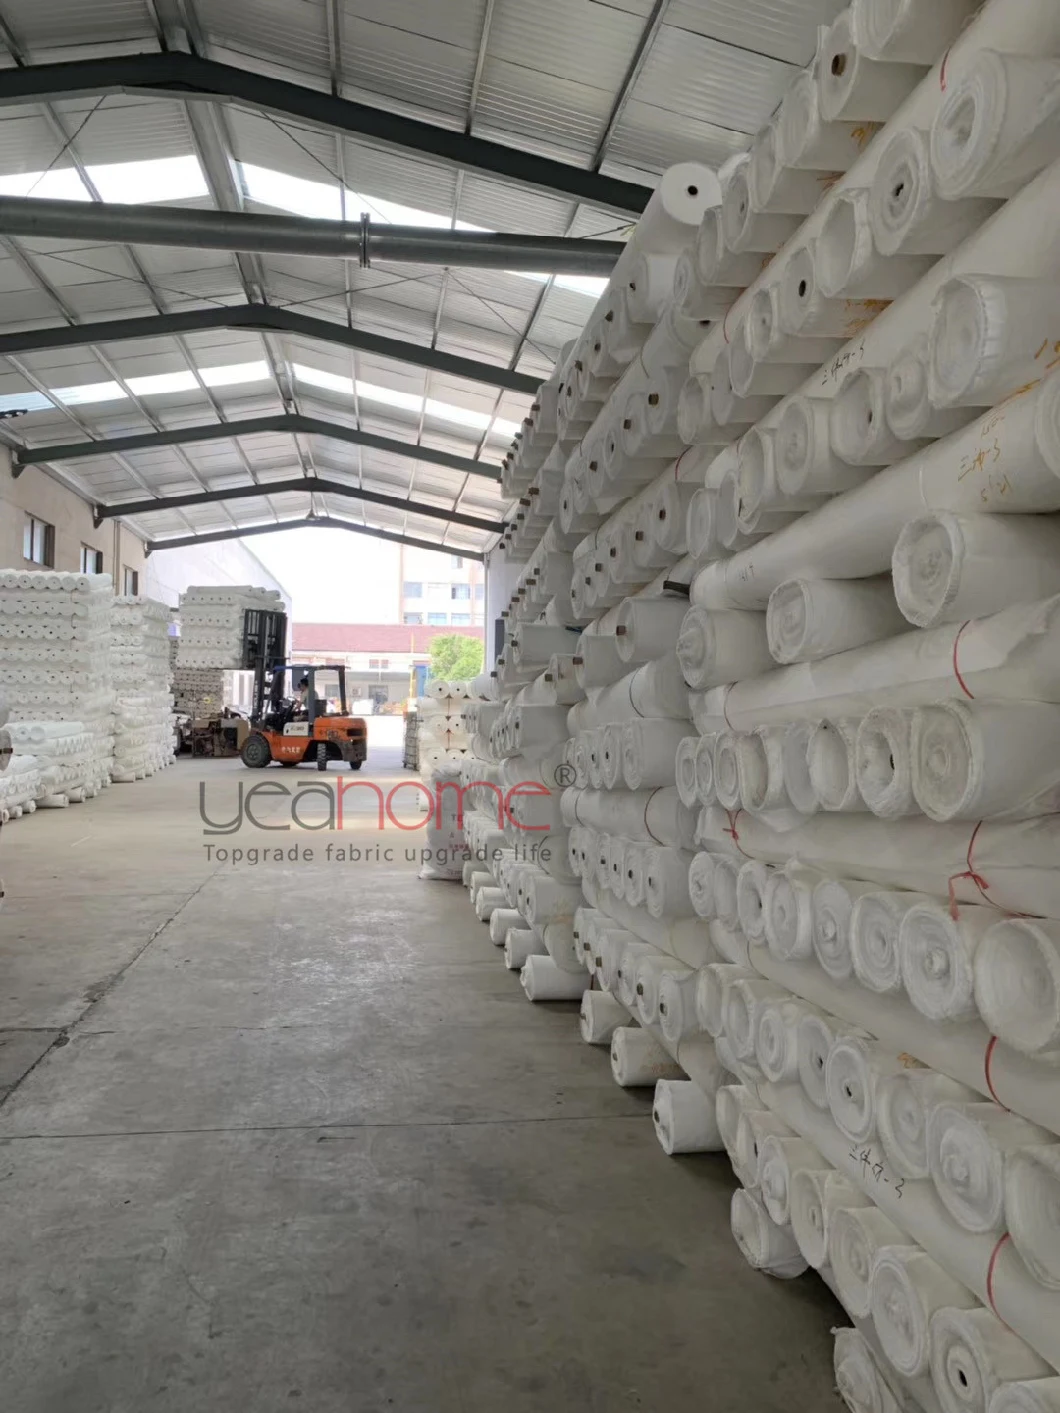 Polyester Fabric Bedding, Bags, Storage Boxes, Curtains, Decorative Cloth, Mattresses, Cushions, Pillows, Sofa, Tablecloth, Table Cloth